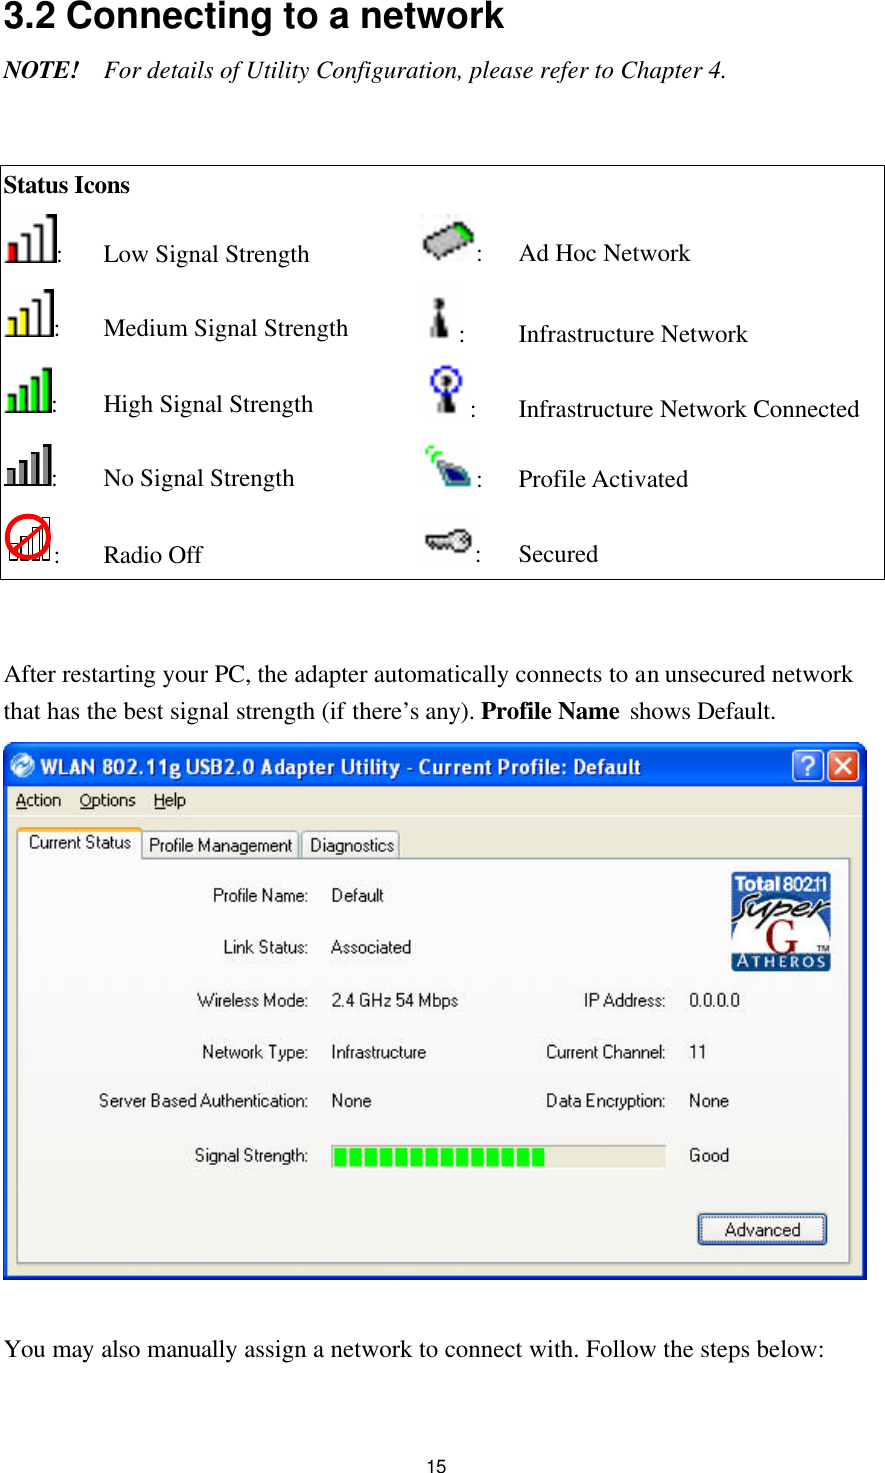  15 3.2 Connecting to a network NOTE! For details of Utility Configuration, please refer to Chapter 4.   Status Icons  : Low Signal Strength  : Ad Hoc Network : Medium Signal Strength :   Infrastructure Network : High Signal Strength : Infrastructure Network Connected : No Signal Strength : Profile Activated : Radio Off : Secured   After restarting your PC, the adapter automatically connects to an unsecured network that has the best signal strength (if there’s any). Profile Name shows Default.    You may also manually assign a network to connect with. Follow the steps below:  